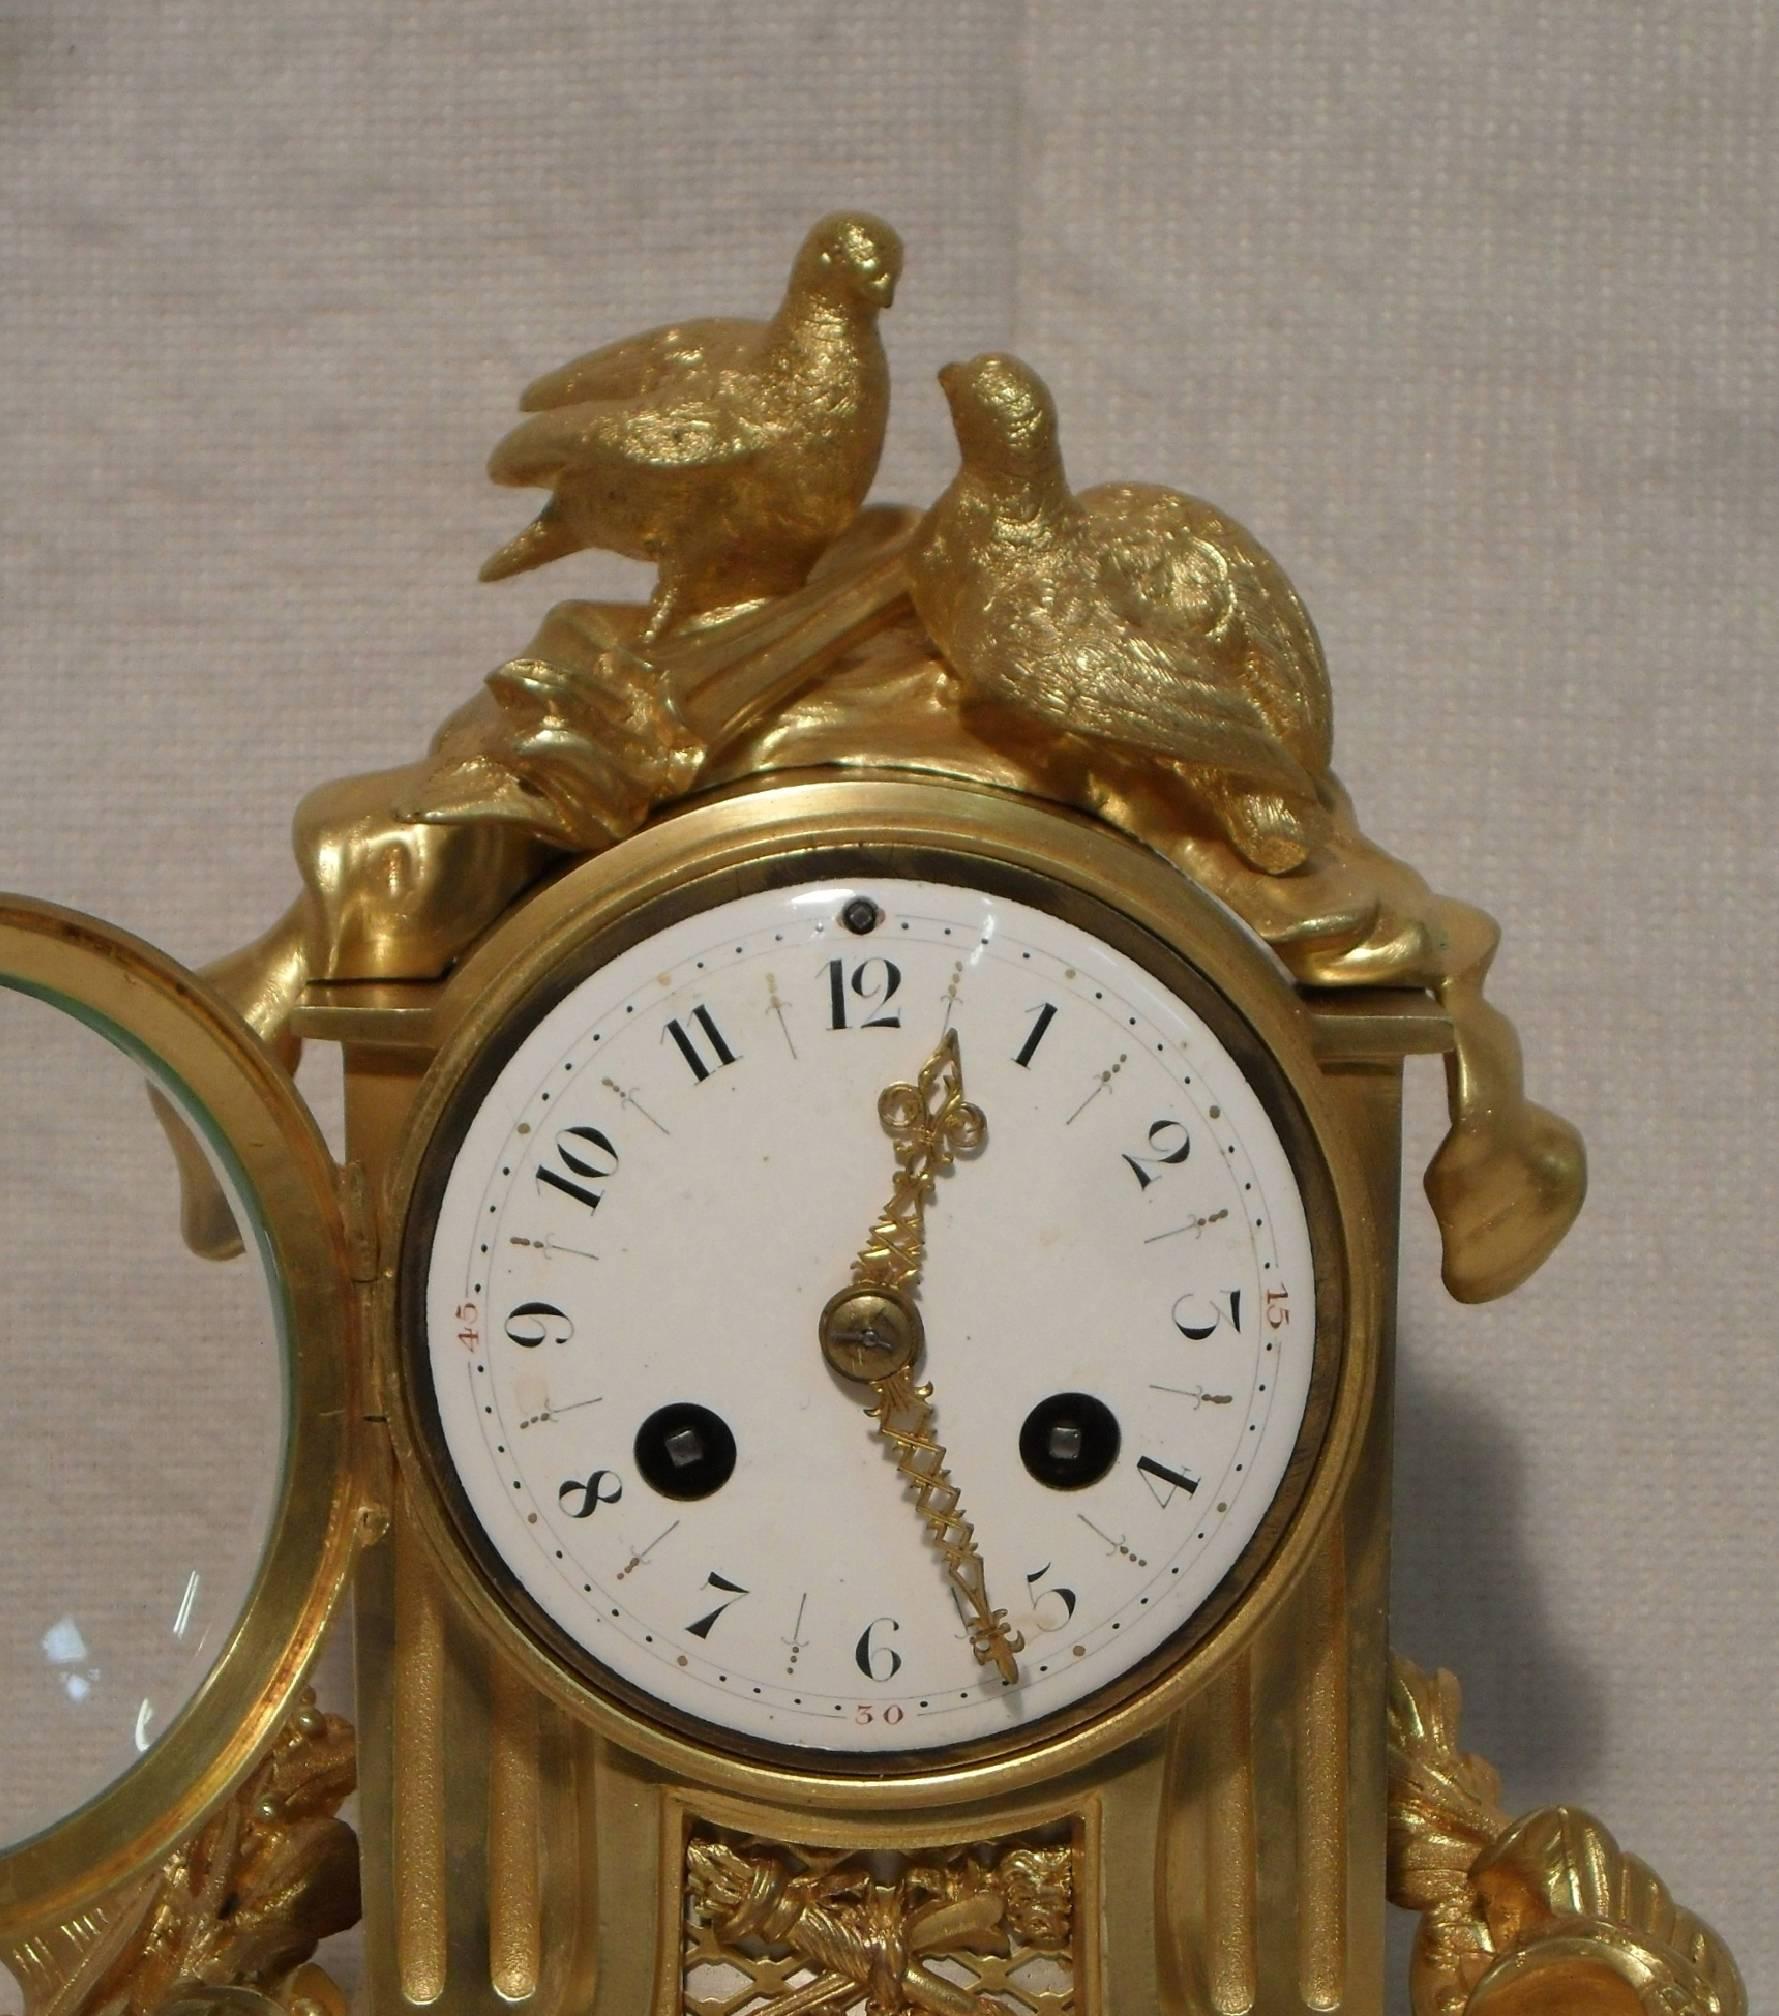 An extremely good quality French bronze gilt ormolu and marble mantel clock with pierced frets, musical instruments and a soldiers helmet and shield surmounted by two doves. The clock has a white enamel dial with a French eight day movement which